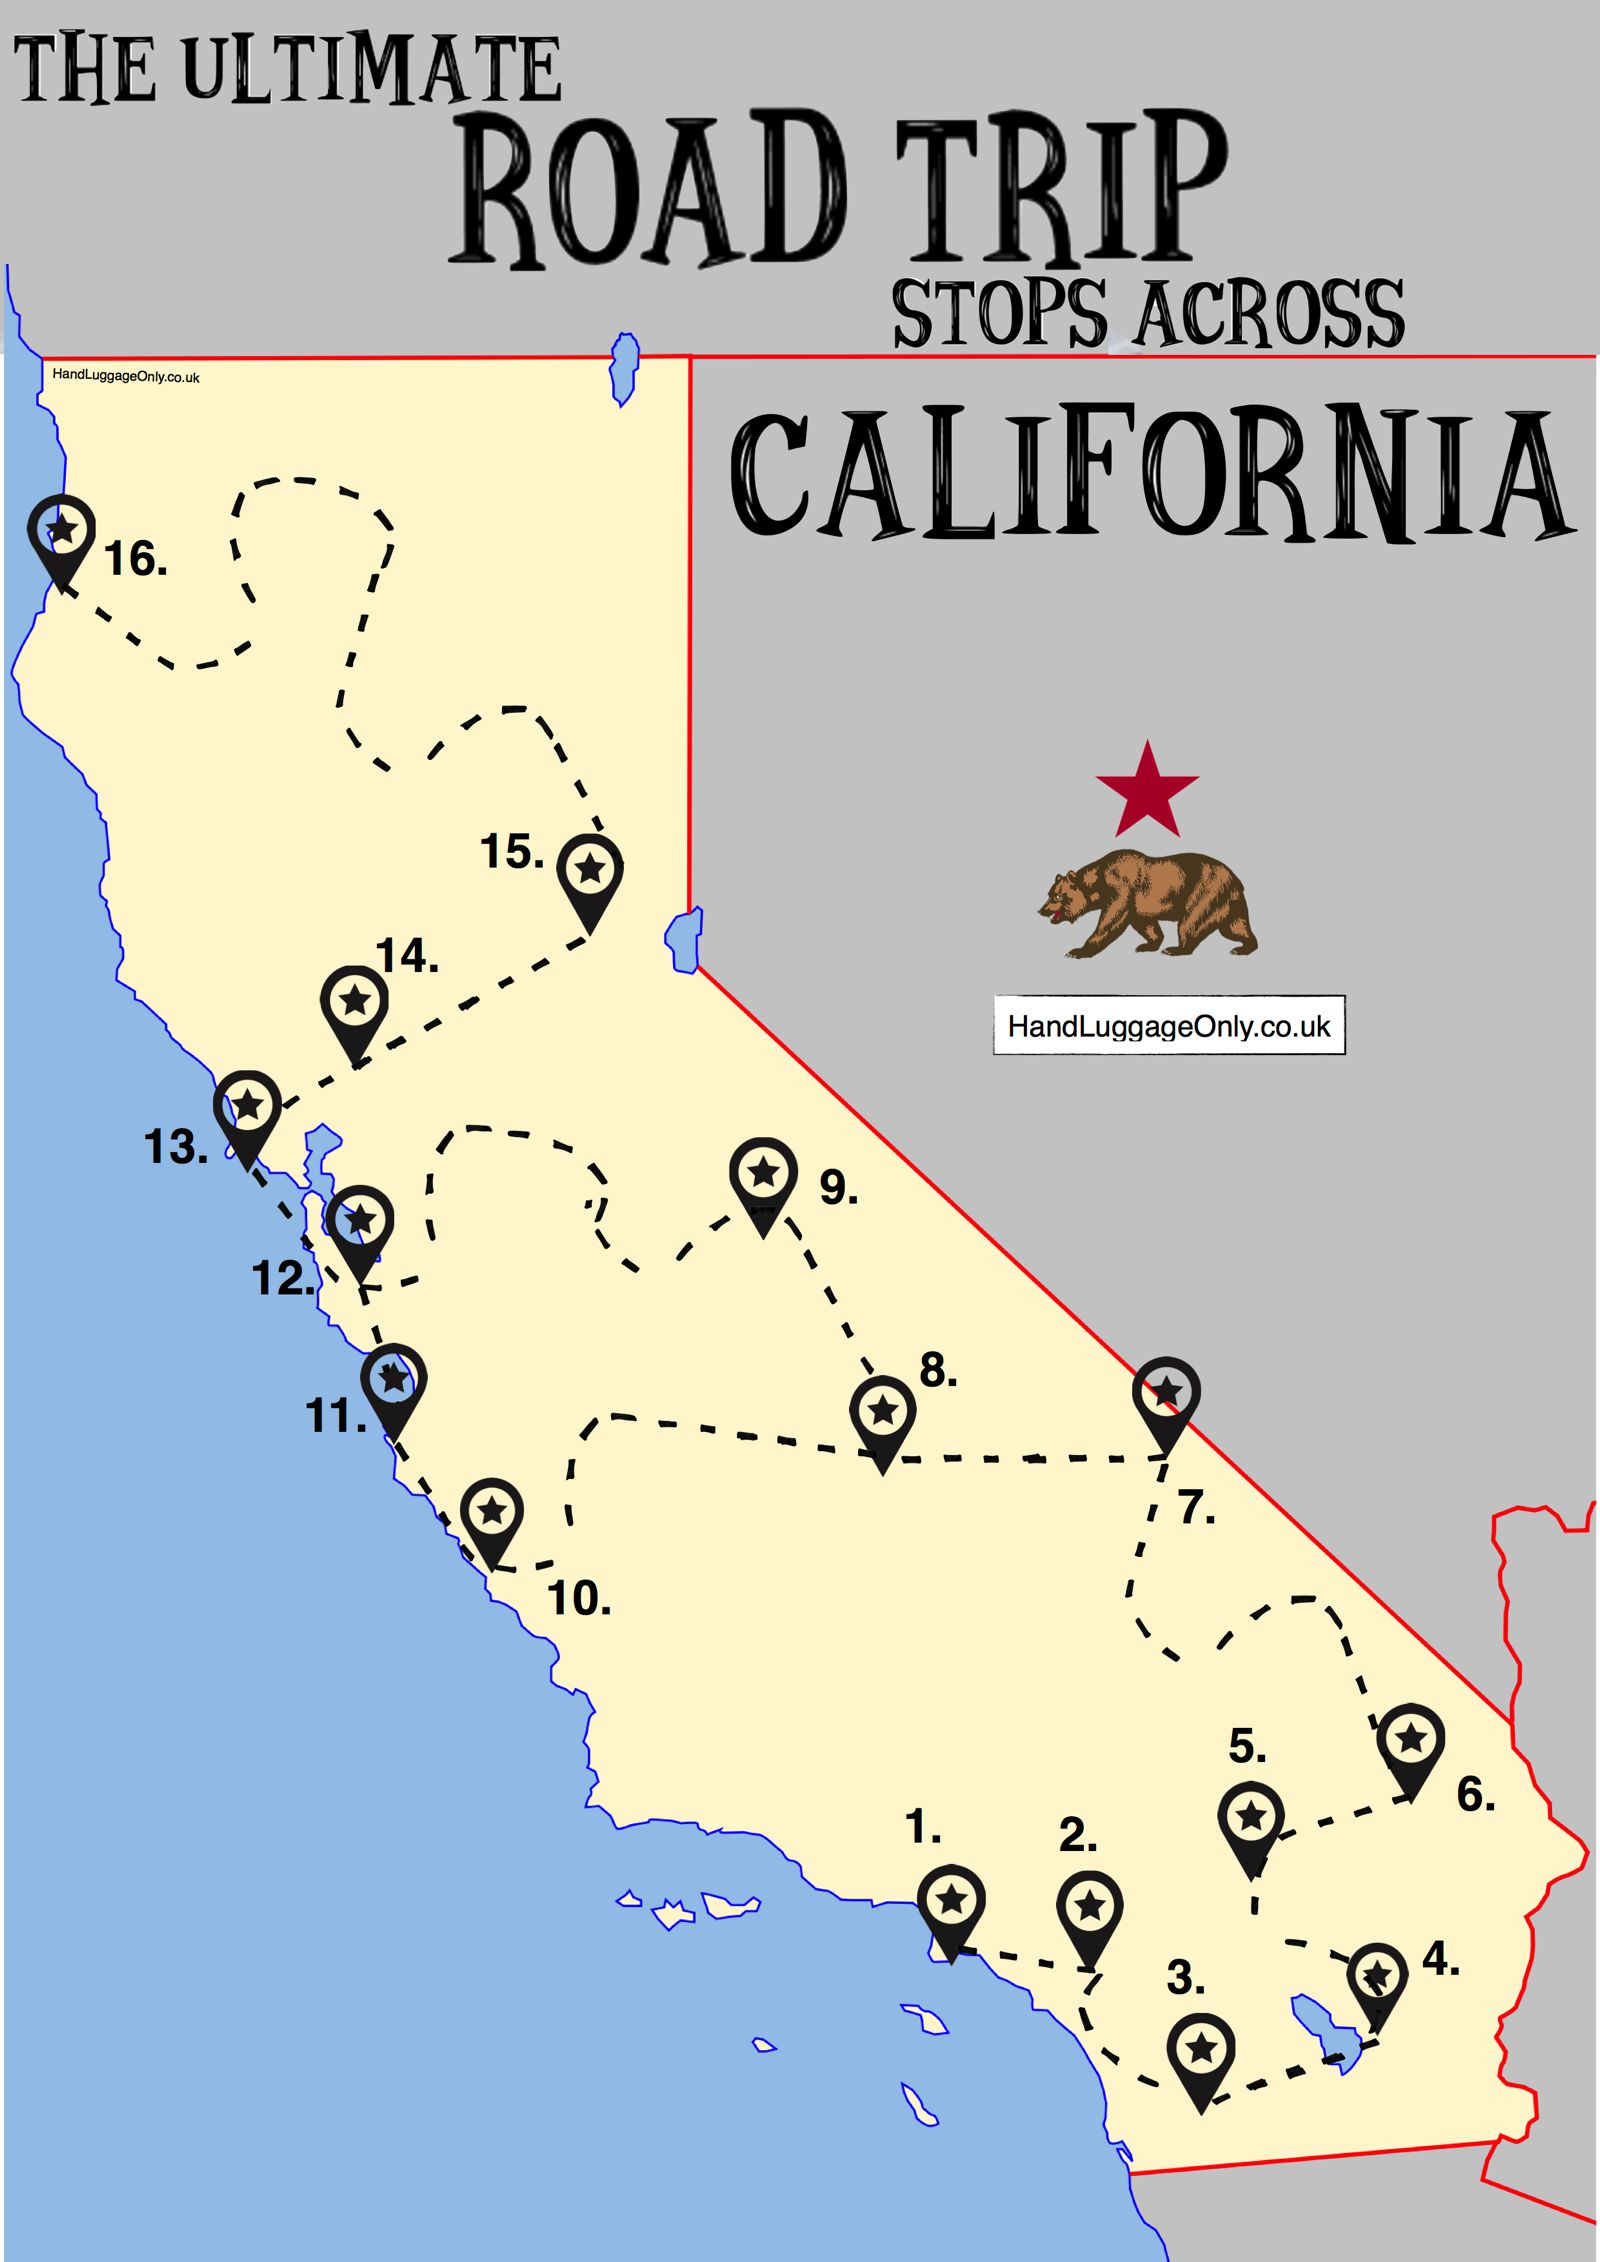 The Ultimate Road Trip Map Of Places To See In California - Hand ...